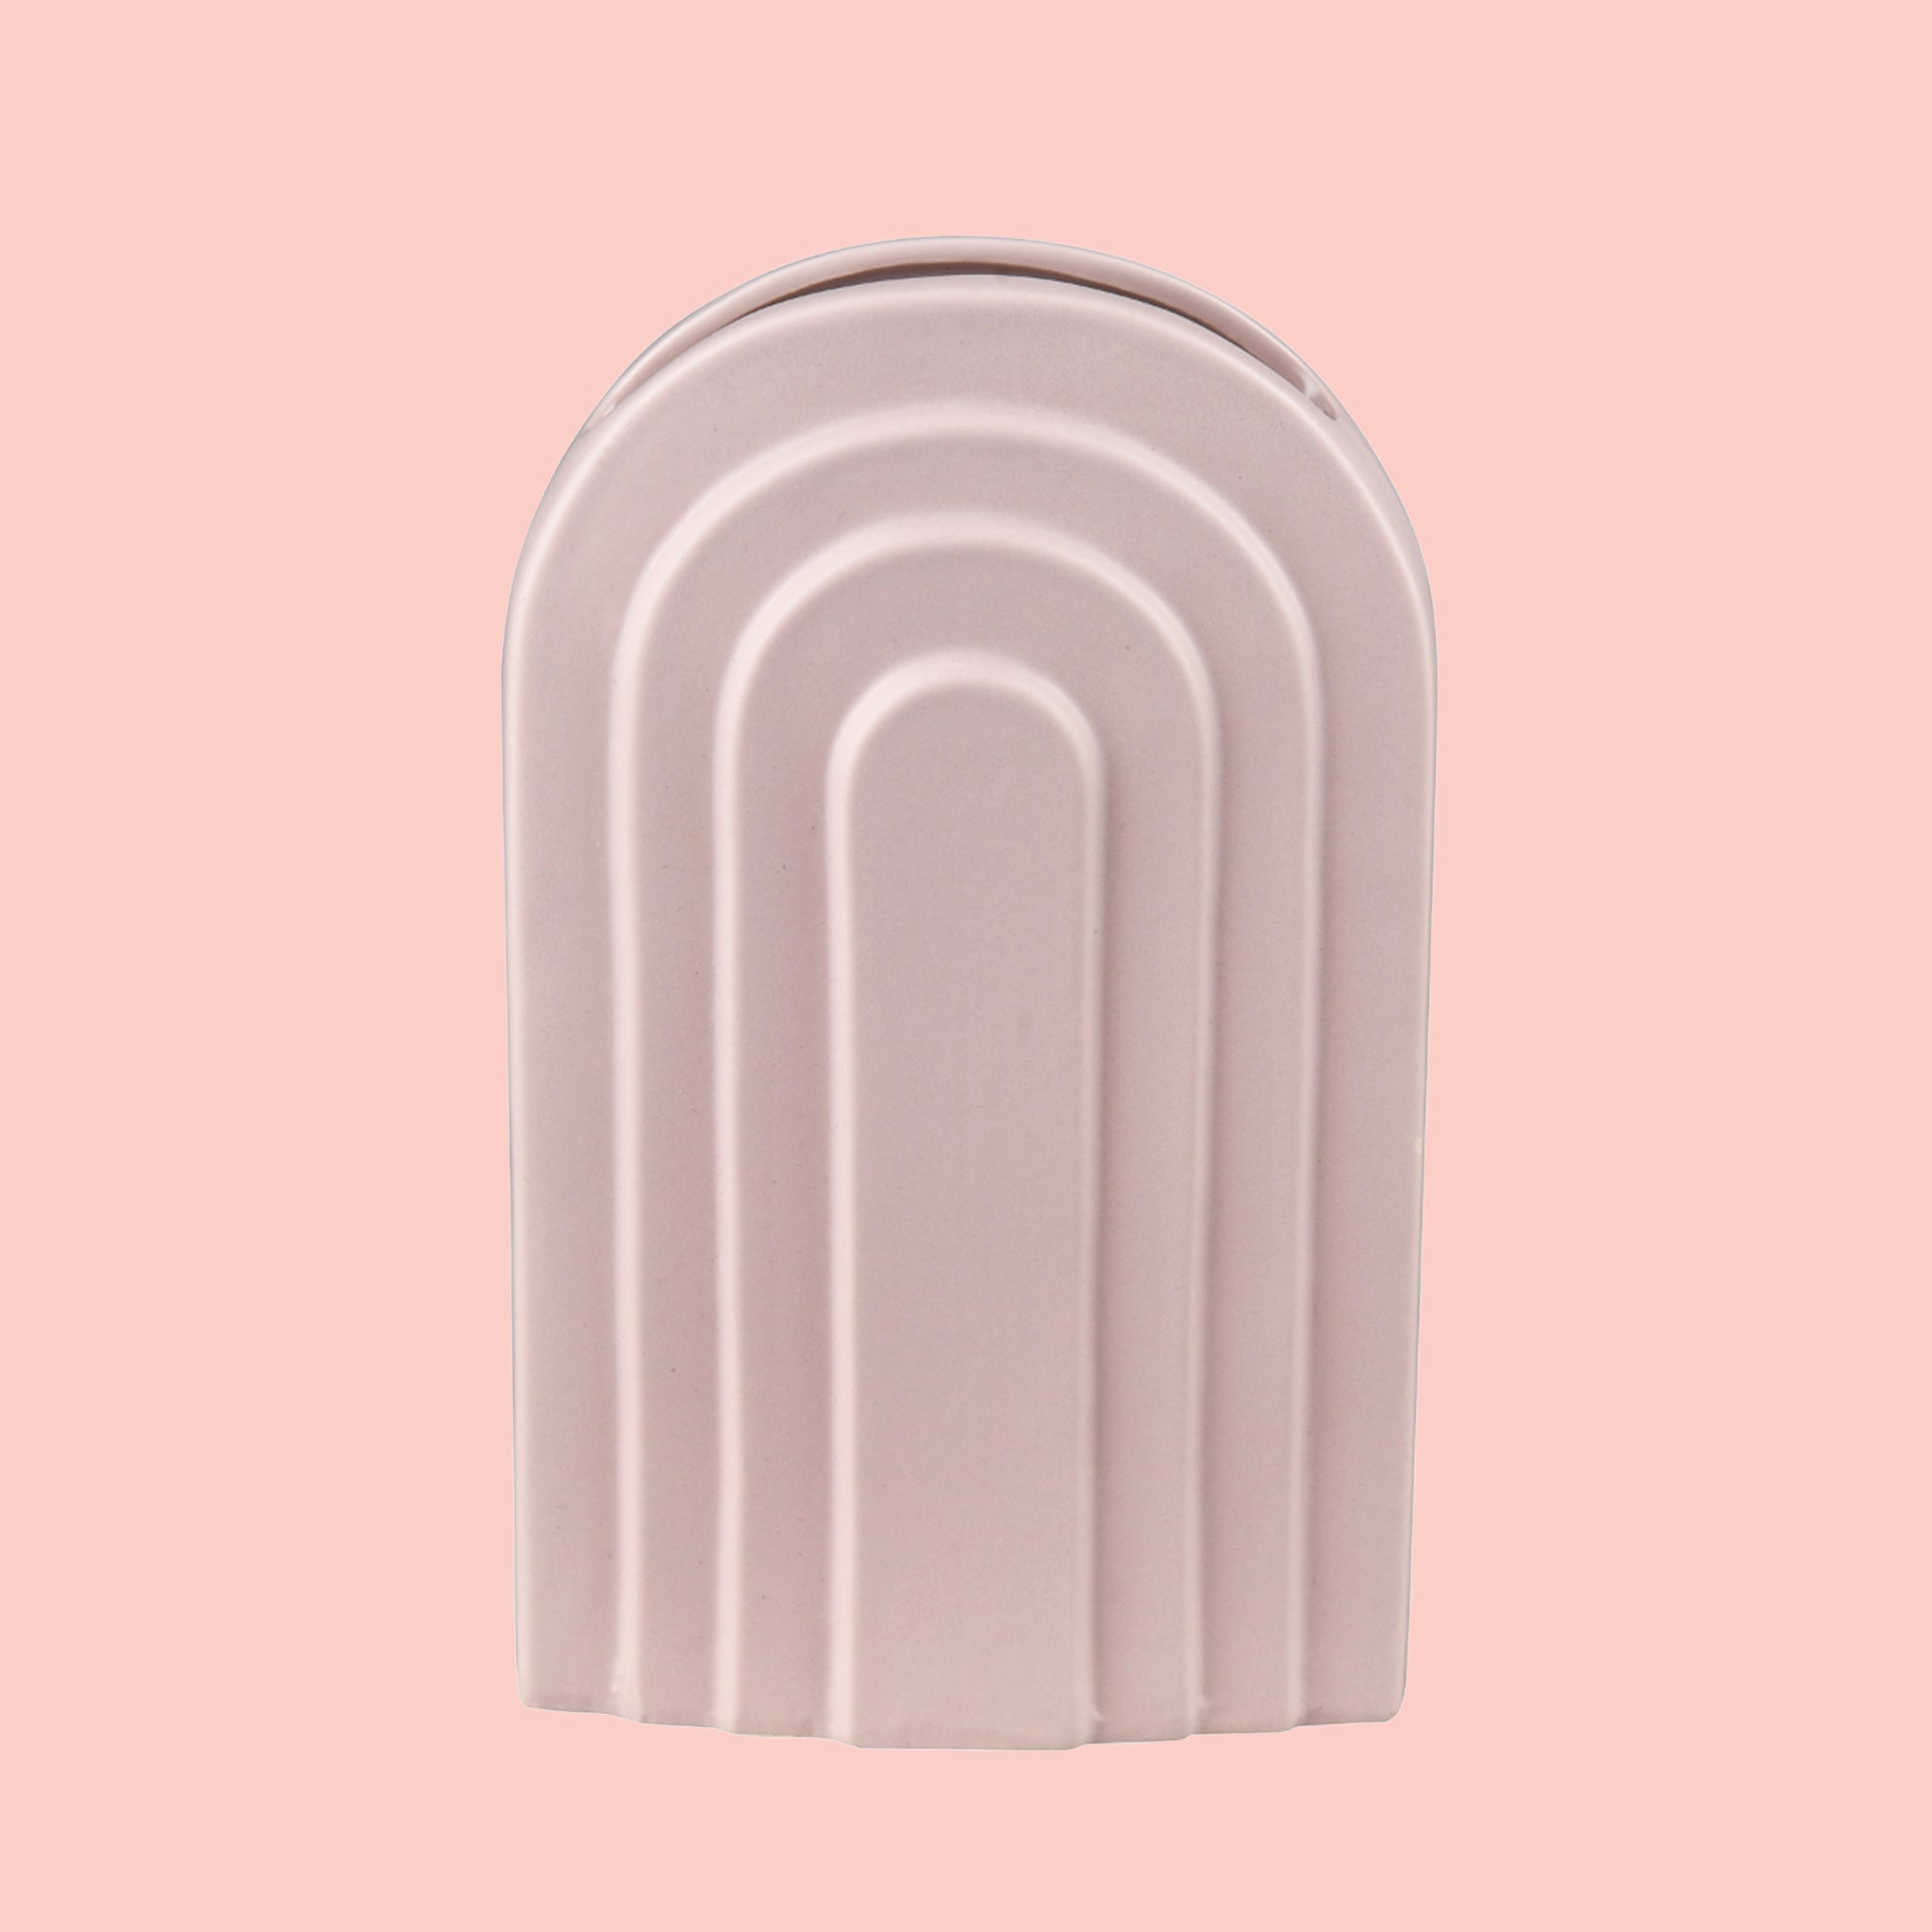 An arched ceramic vase in a cool toned pink shade. 